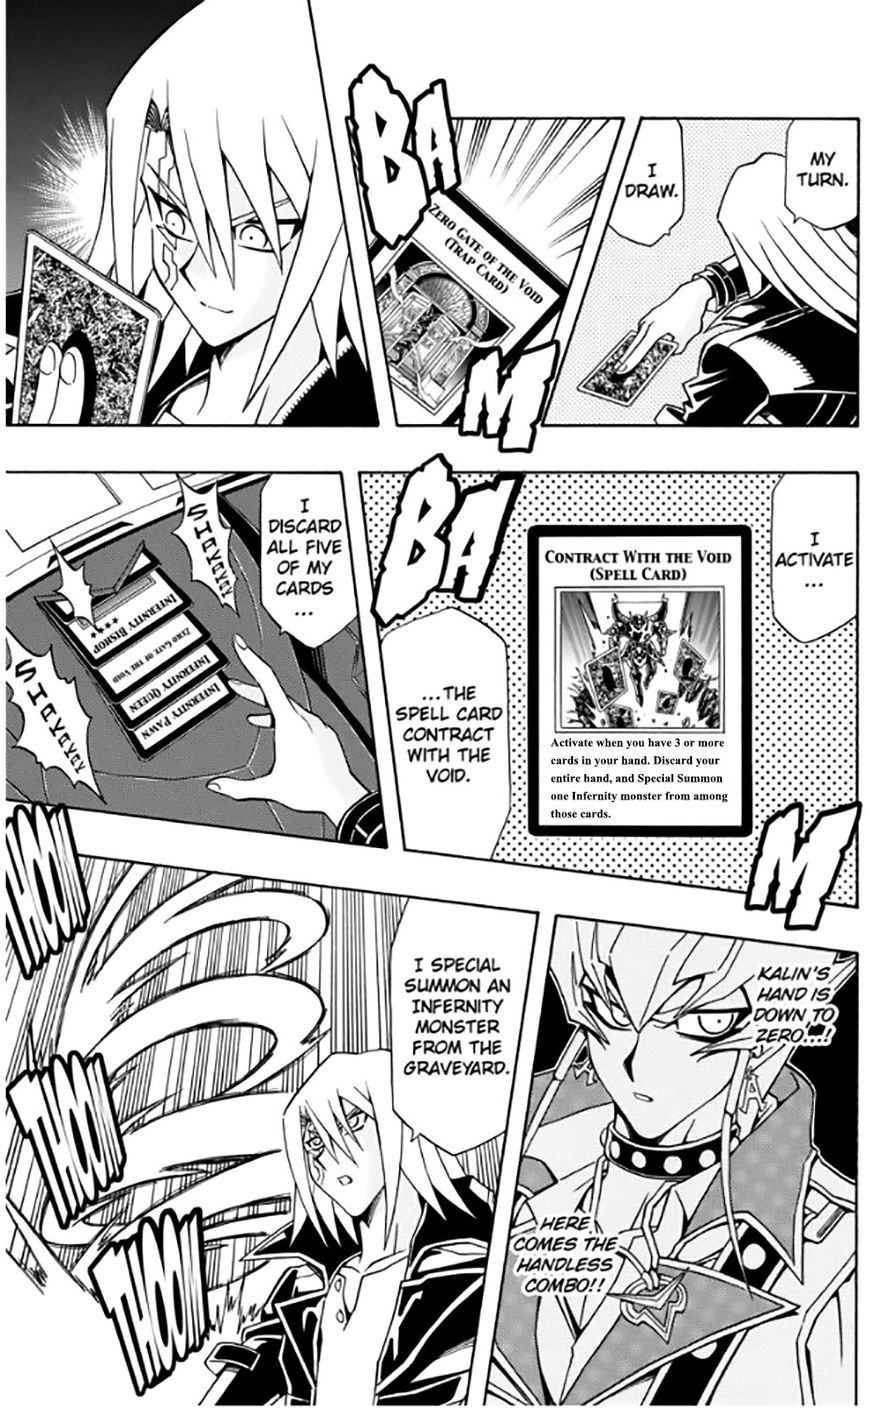 Yu-gi-oh 5d's - chapter 32 - #4